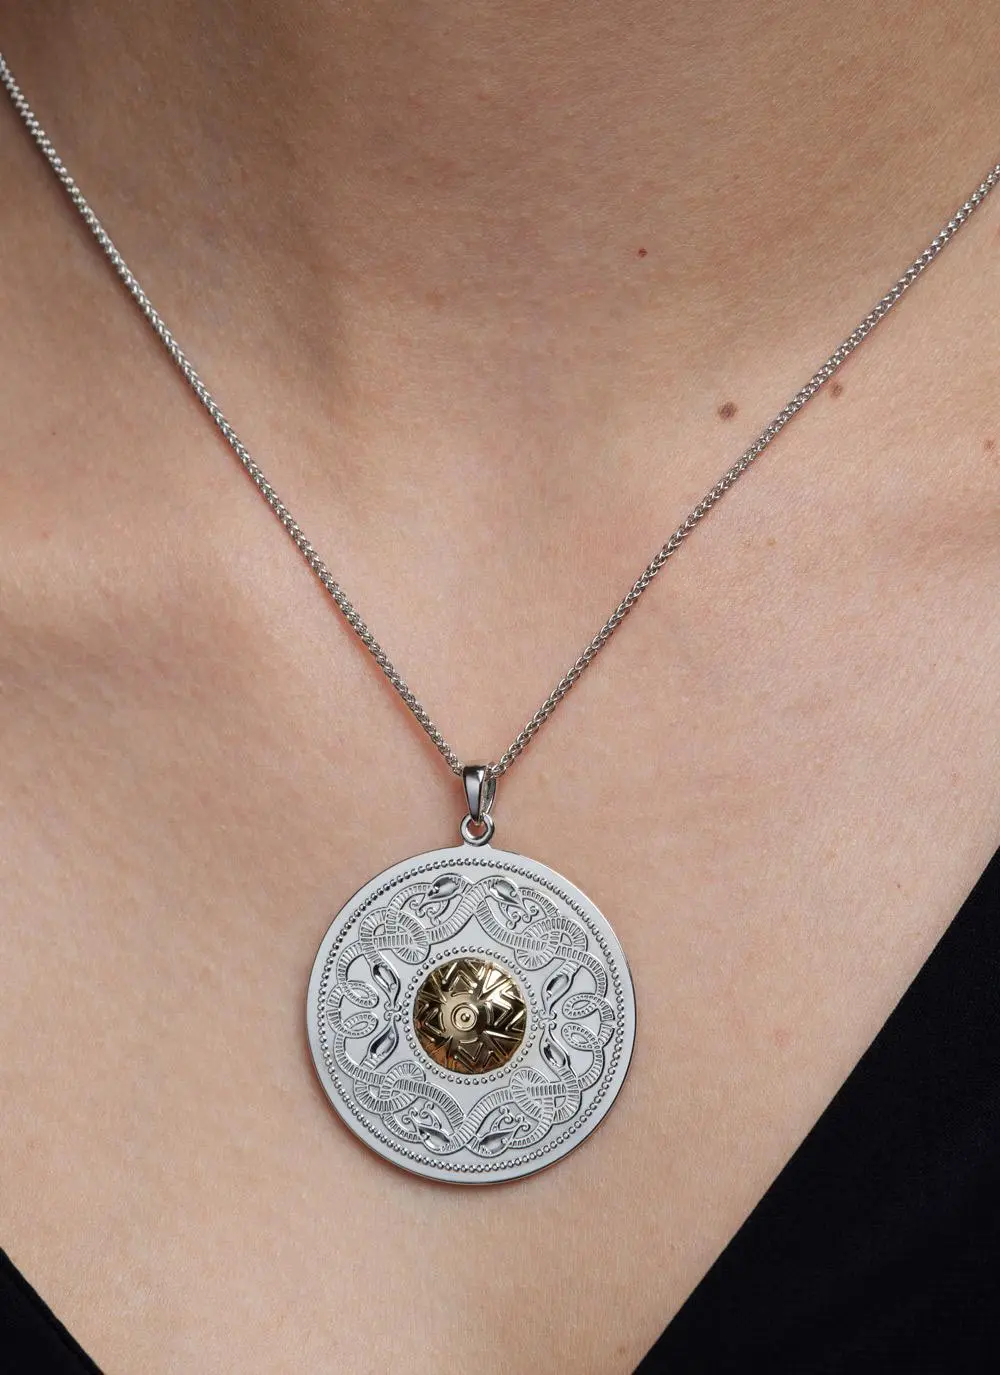 ID Mini Locket Chain Necklace Adjustable 41-46cm/16-18' in 18ct Gold  Vermeil on Sterling Silver | Jewellery by Monica Vinader